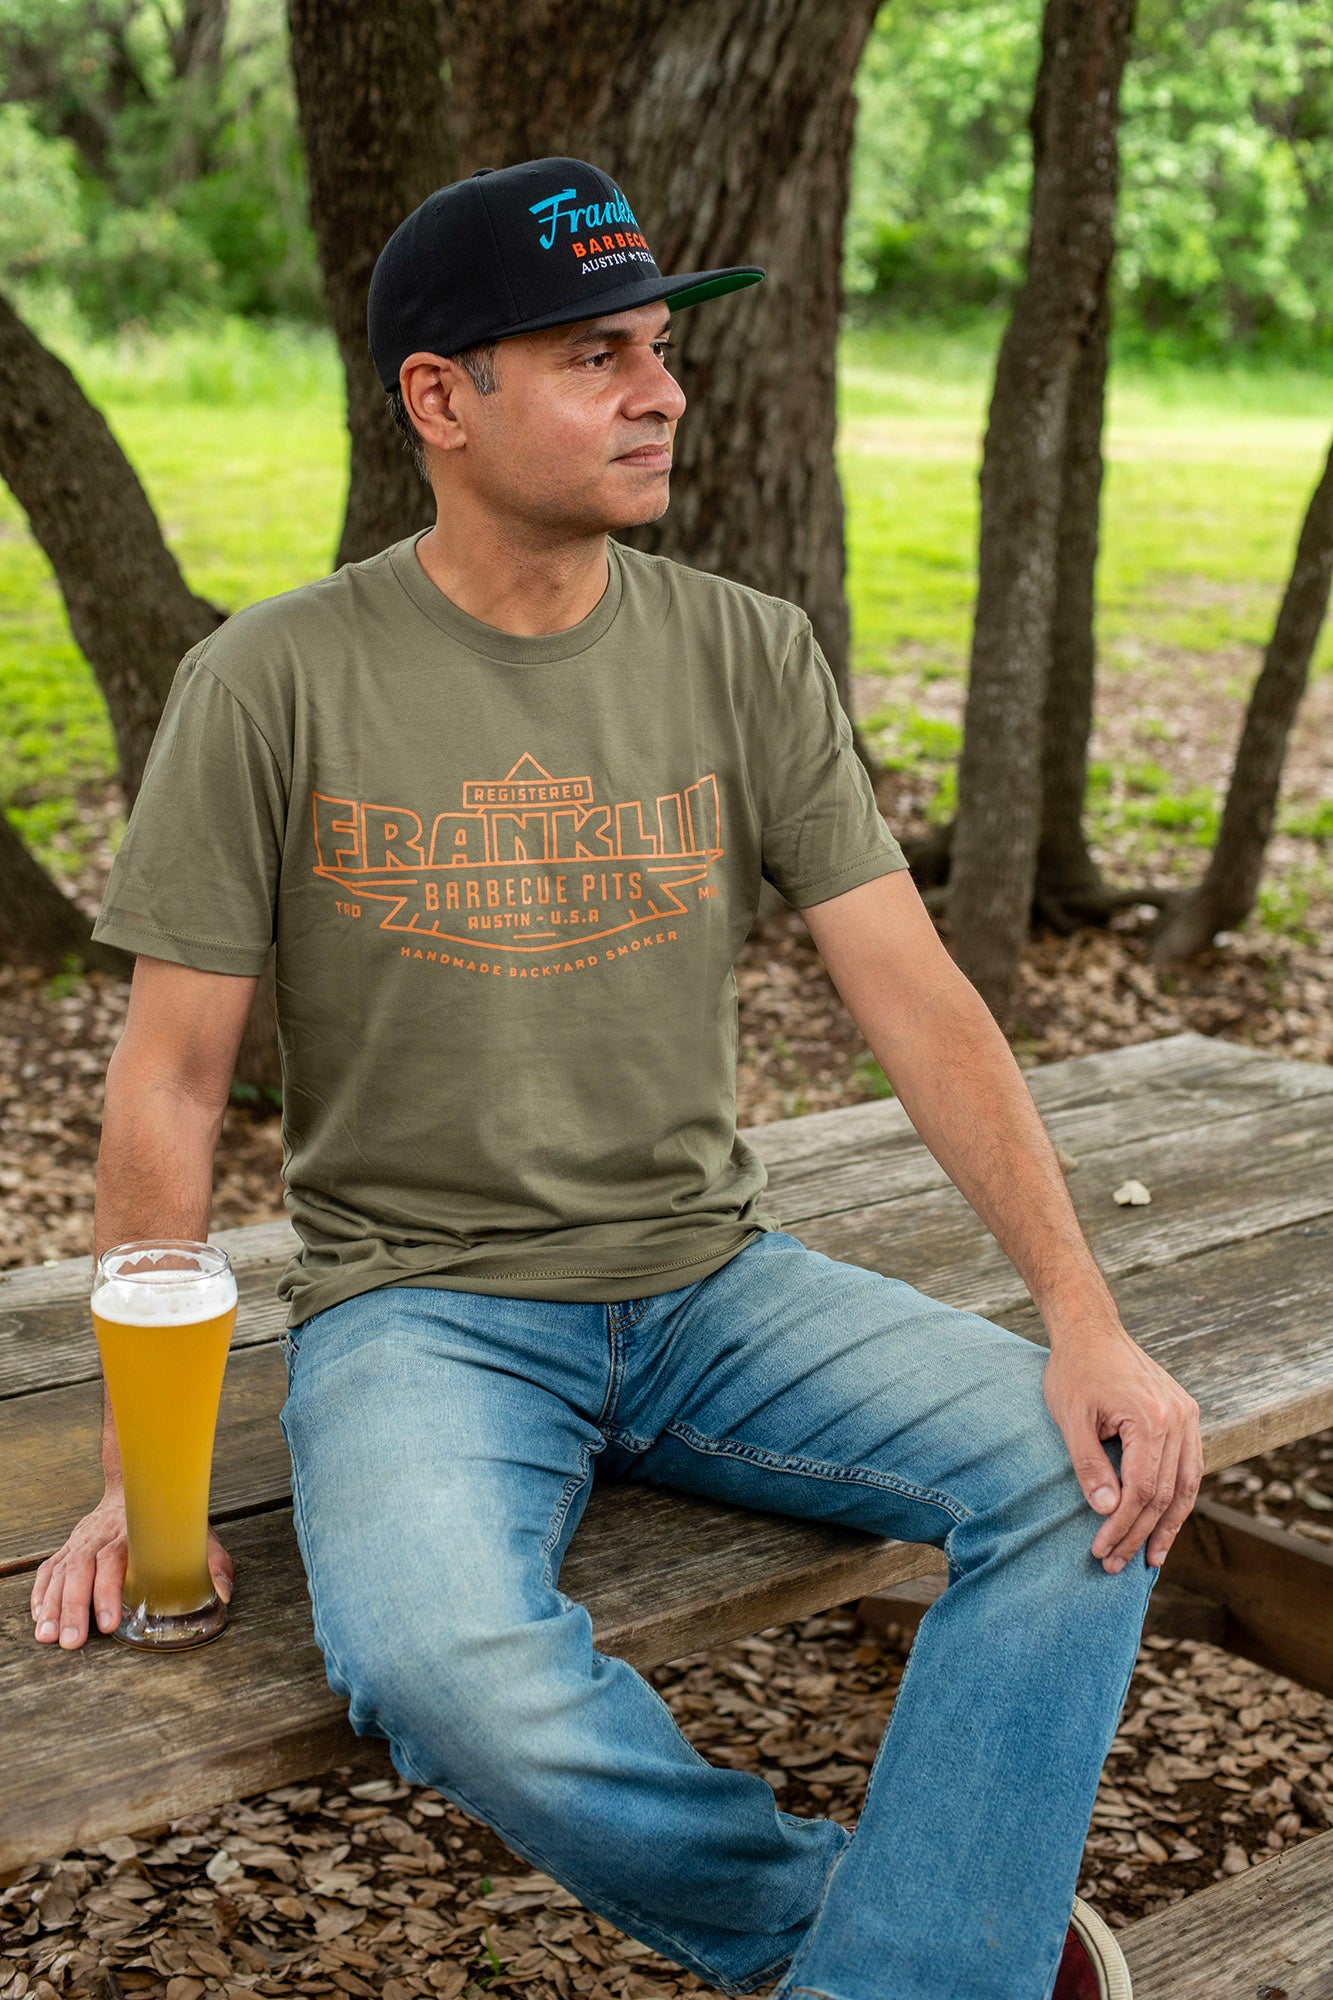 Man sits and enjoys a beer while wearing the black hat.